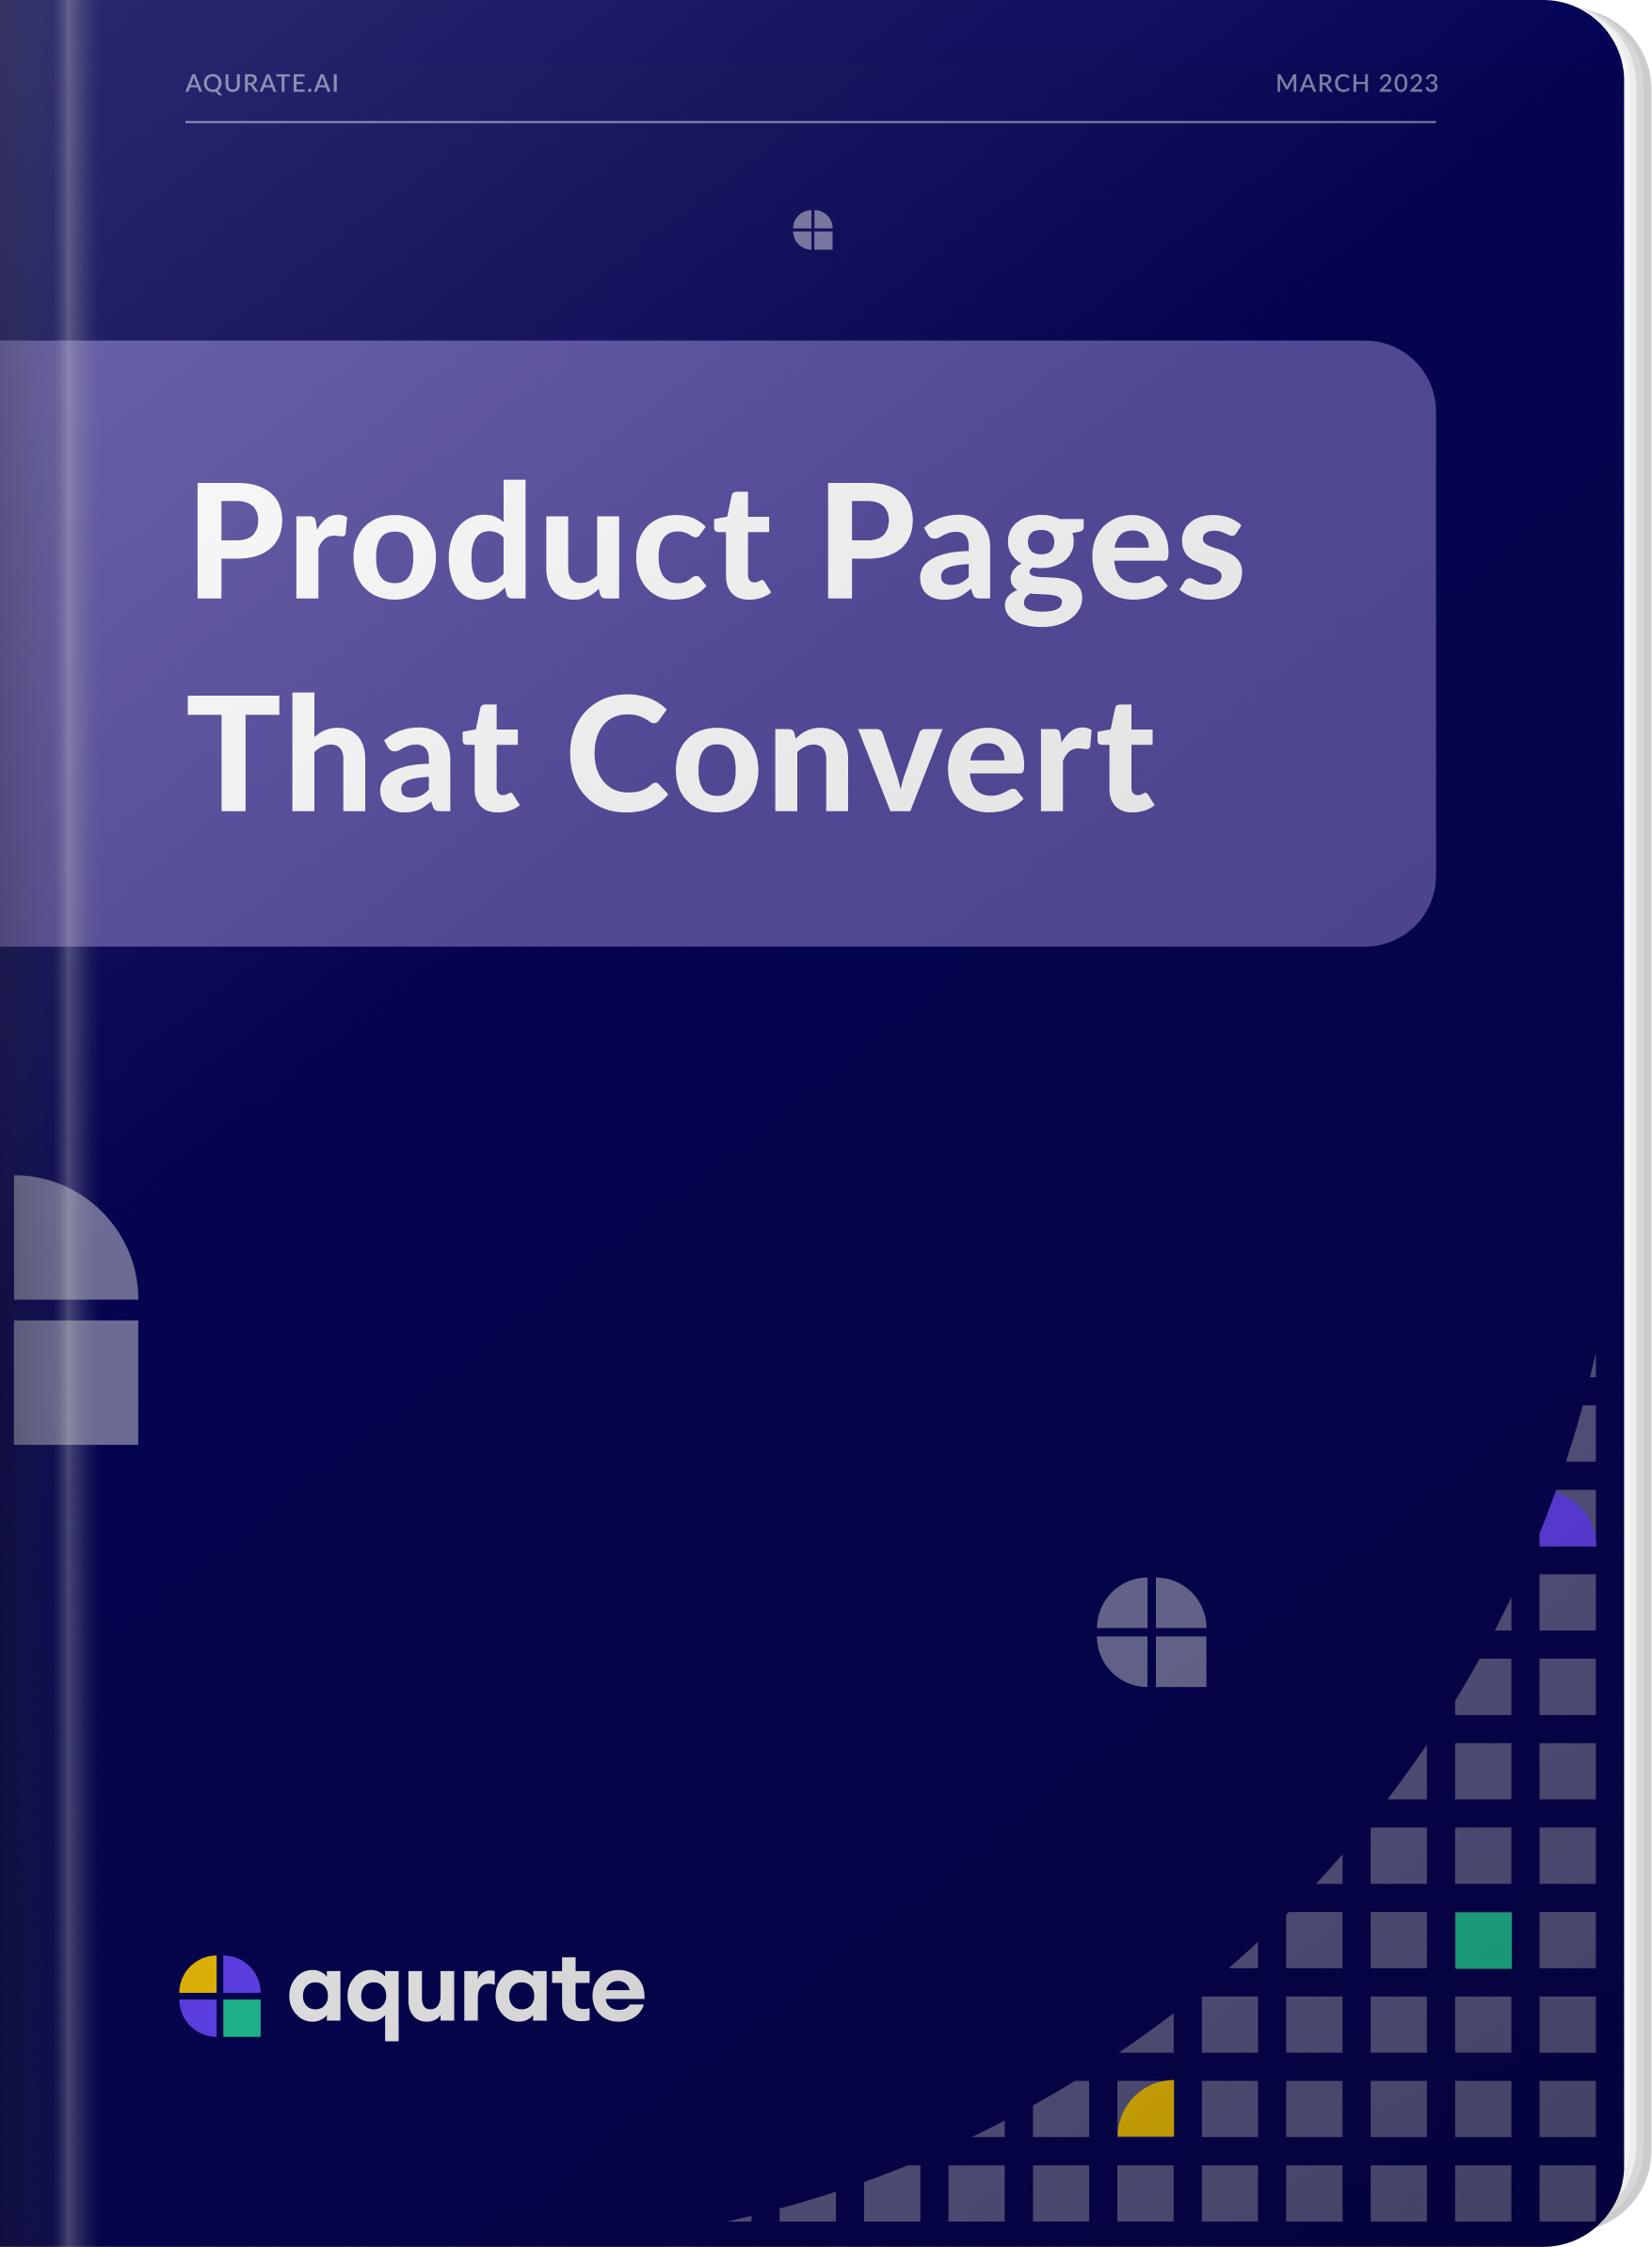 Product pages that convert